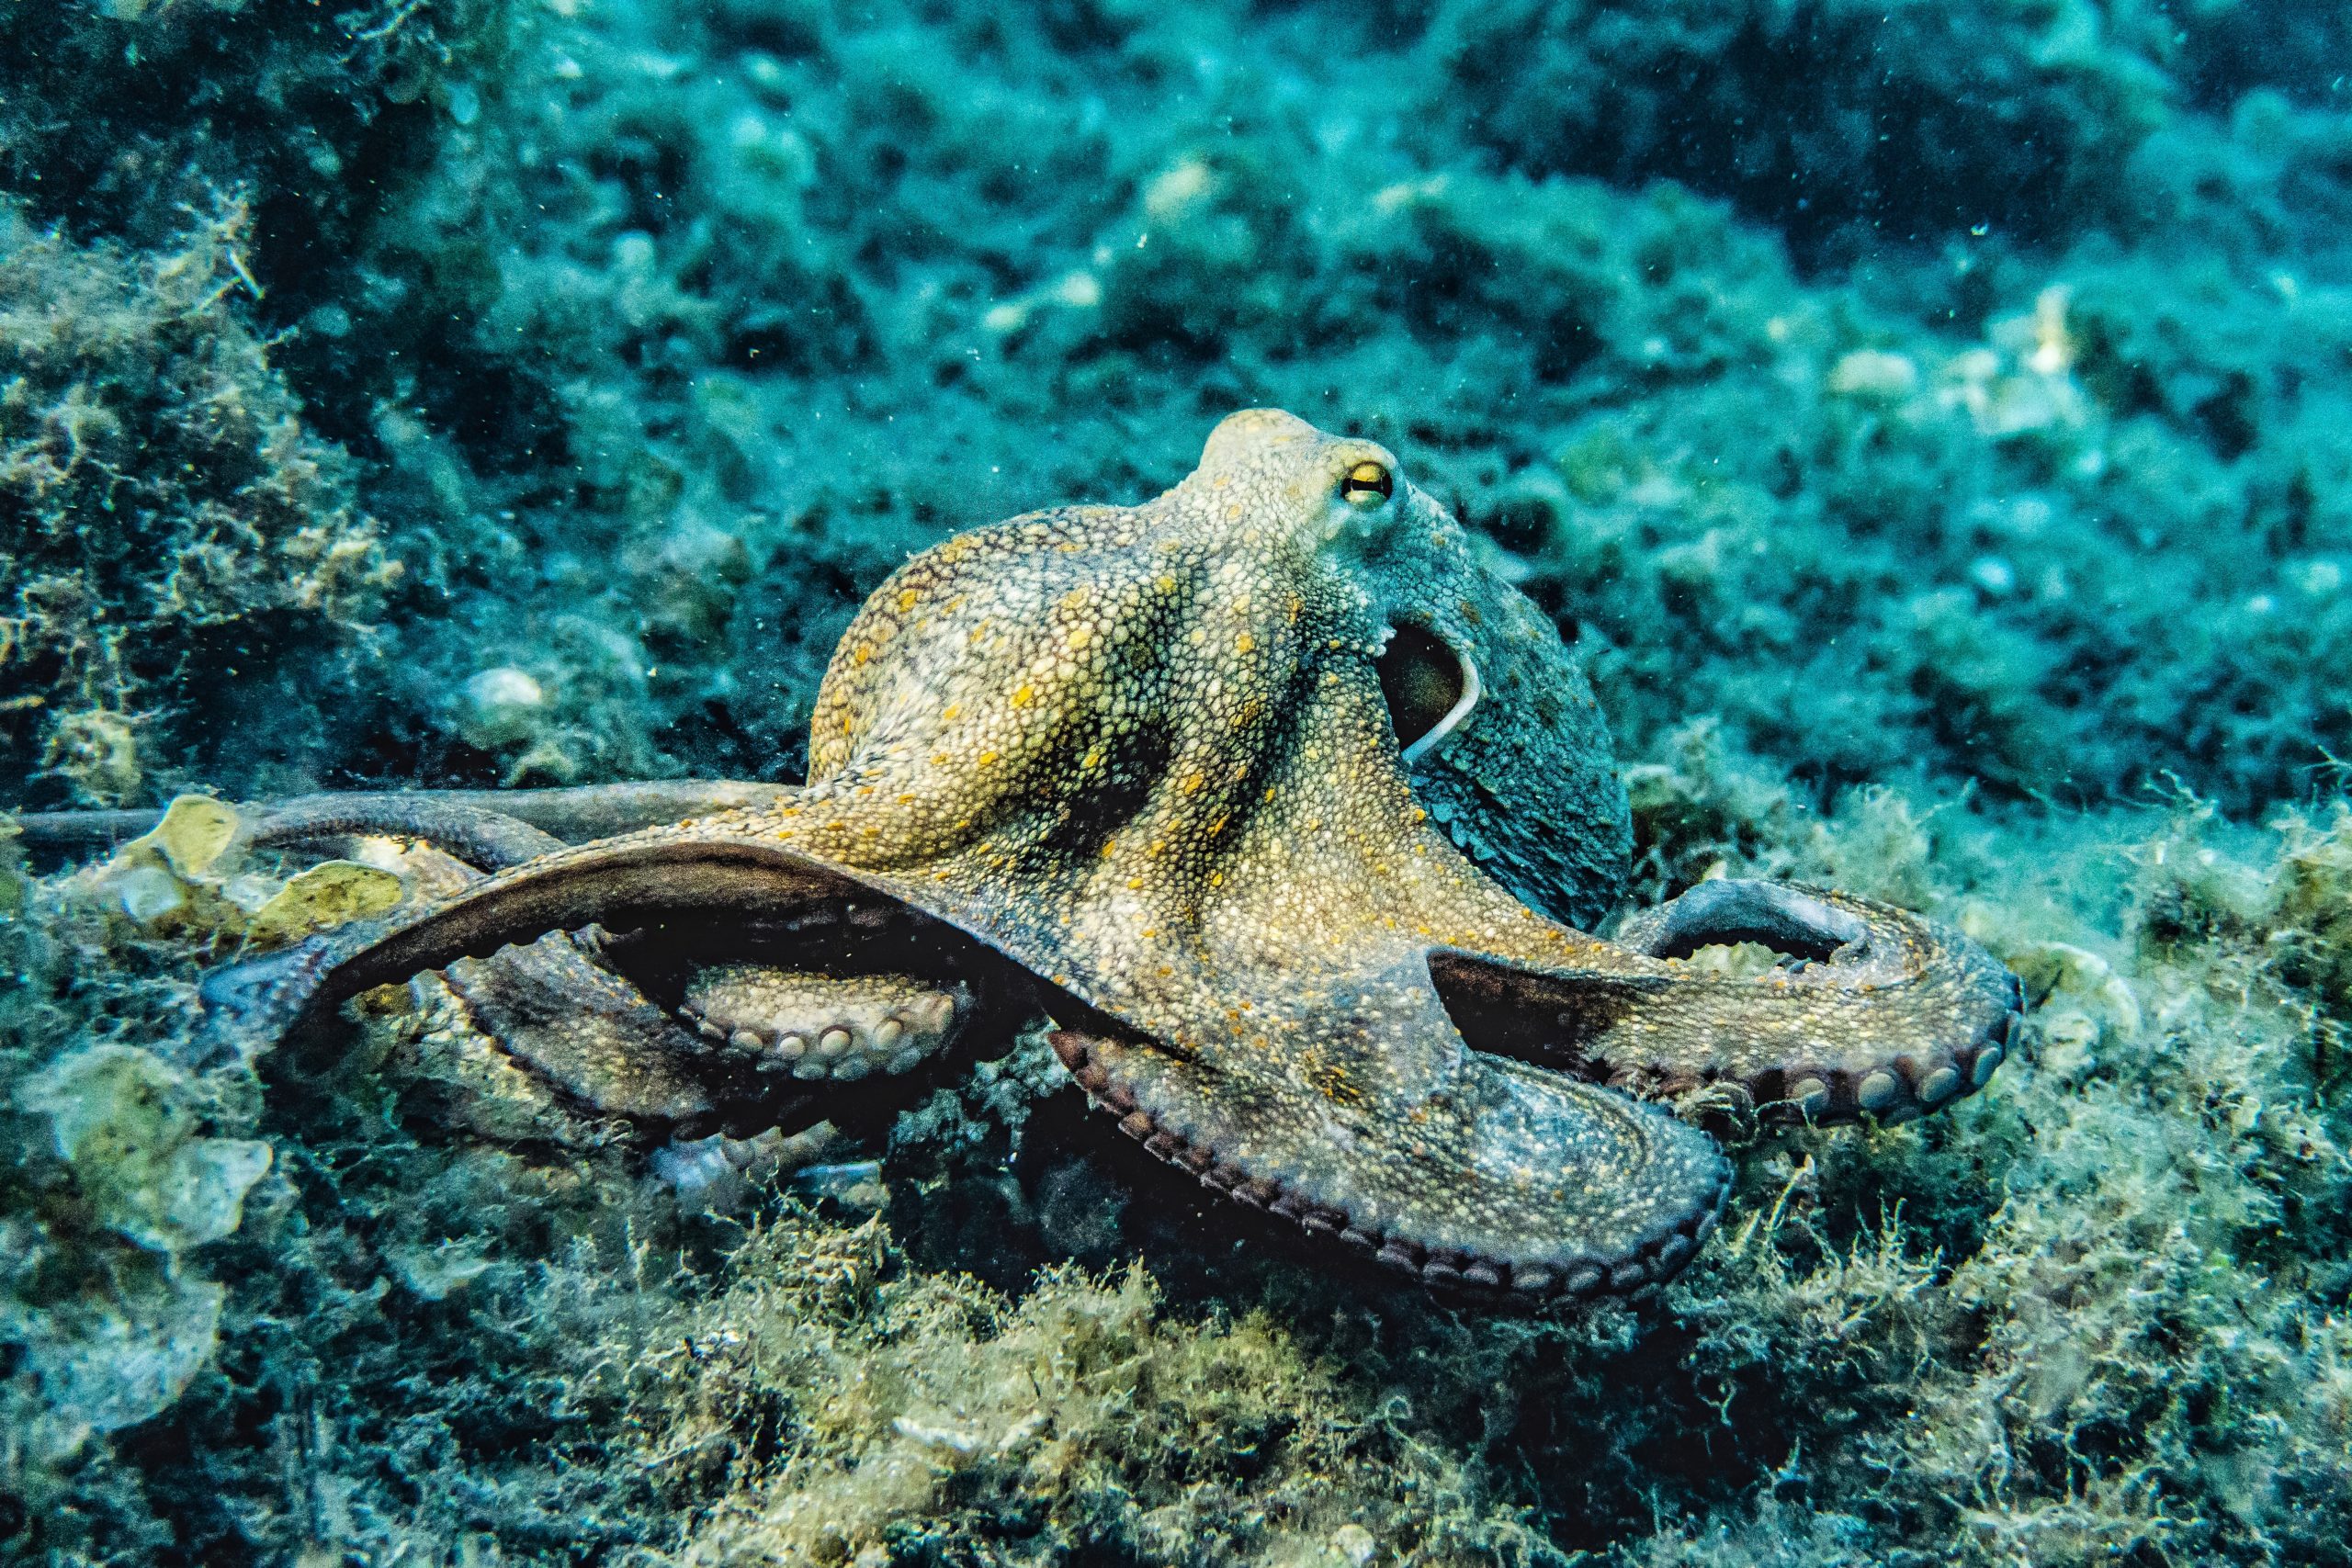 Octopus Farms Raise Massive Ethical And Evironmental Concerns